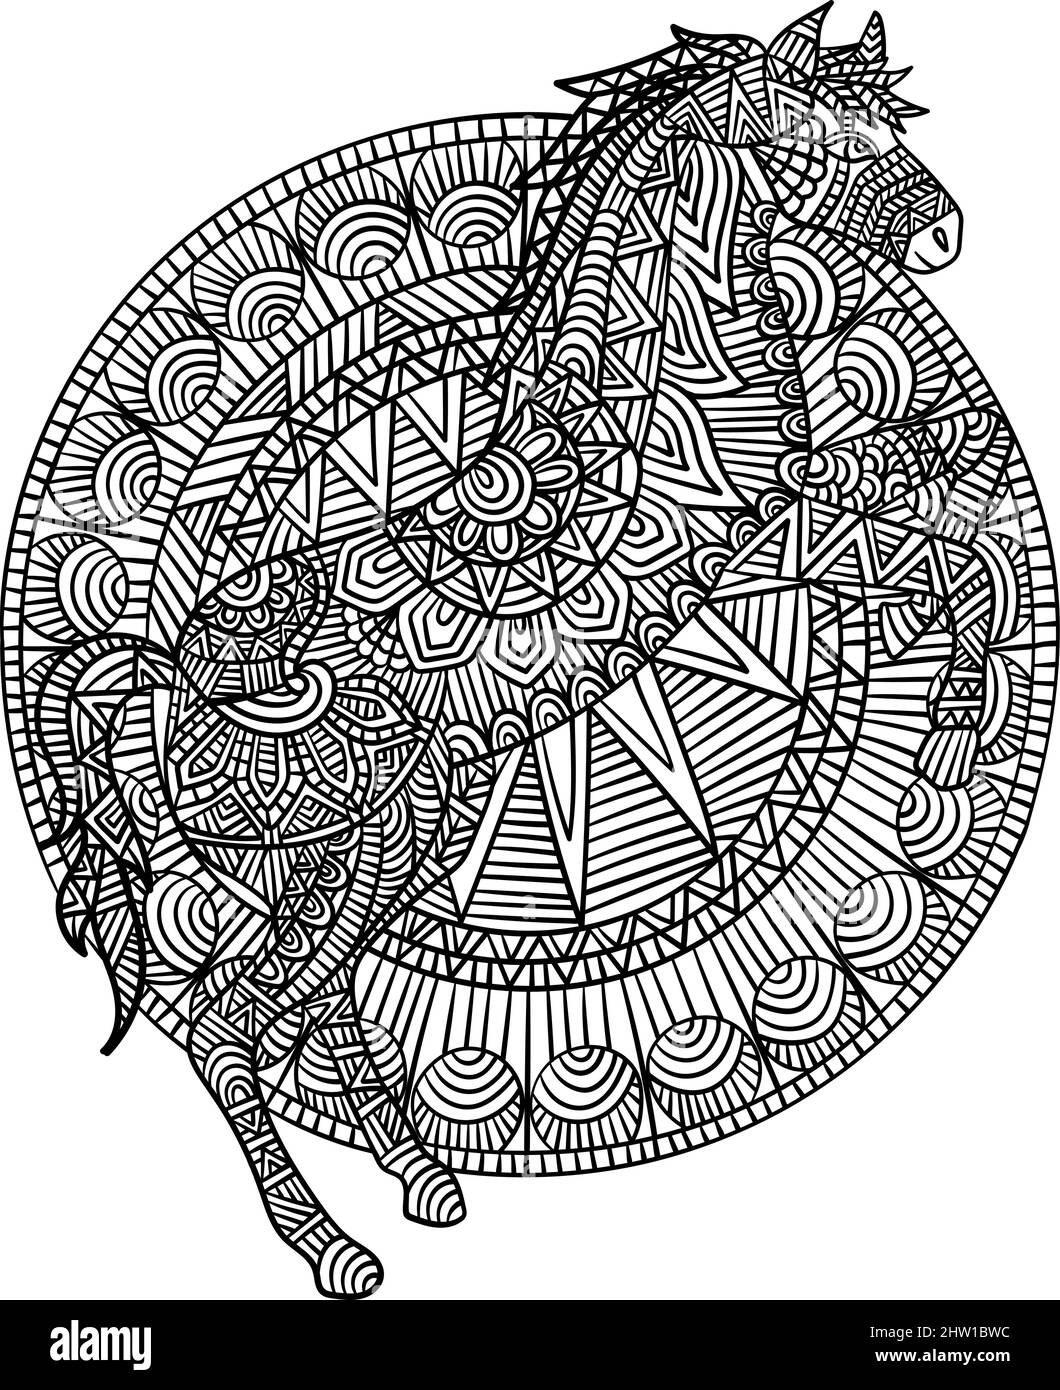 Horse Mandala Coloring Pages for Adults Stock Vector